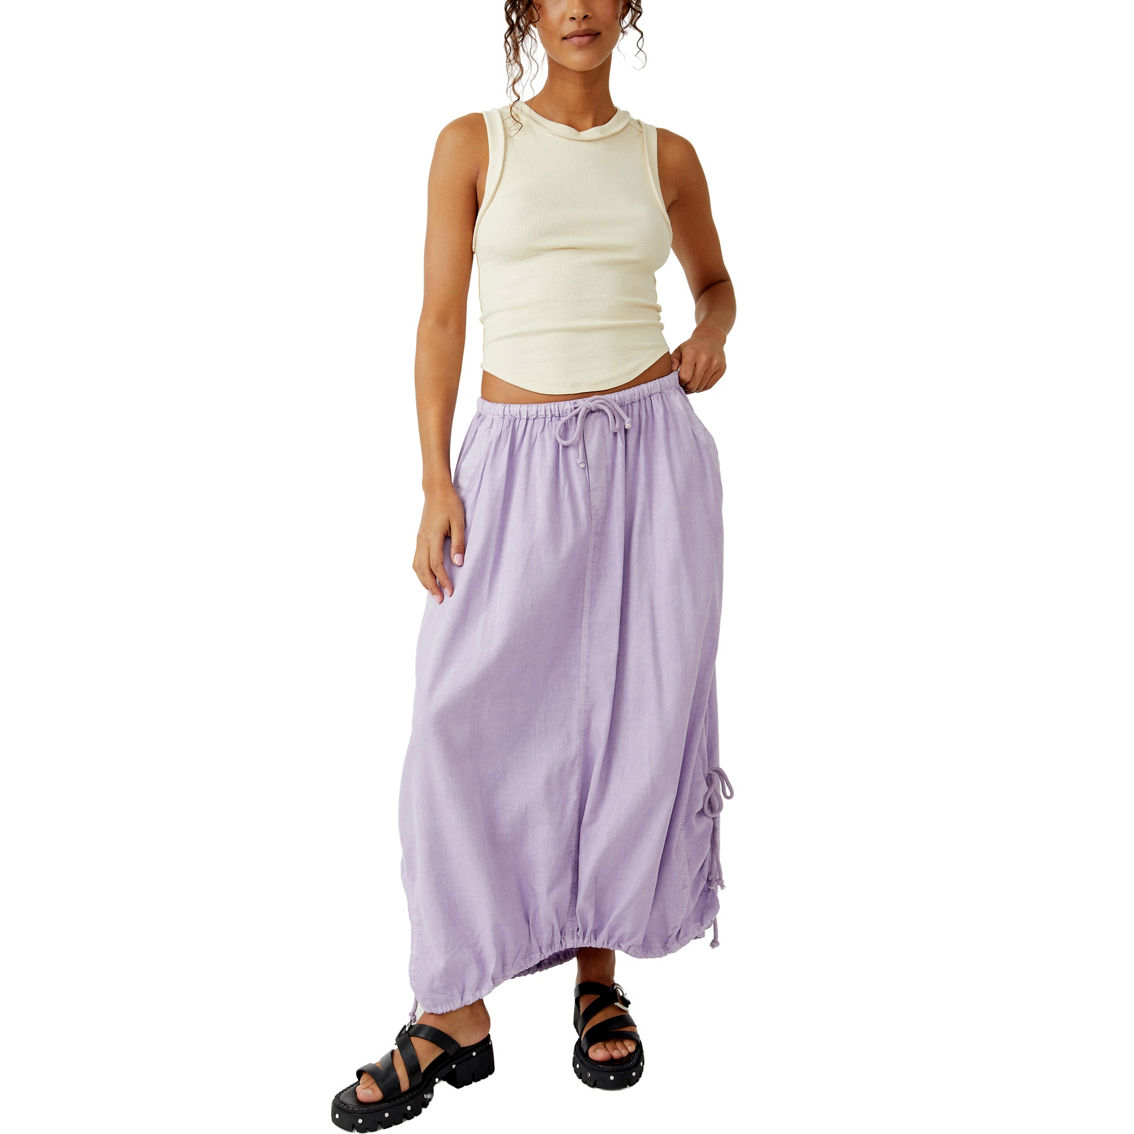 Free People Picture Perfect Parachute Skirt - Image 6 of 6